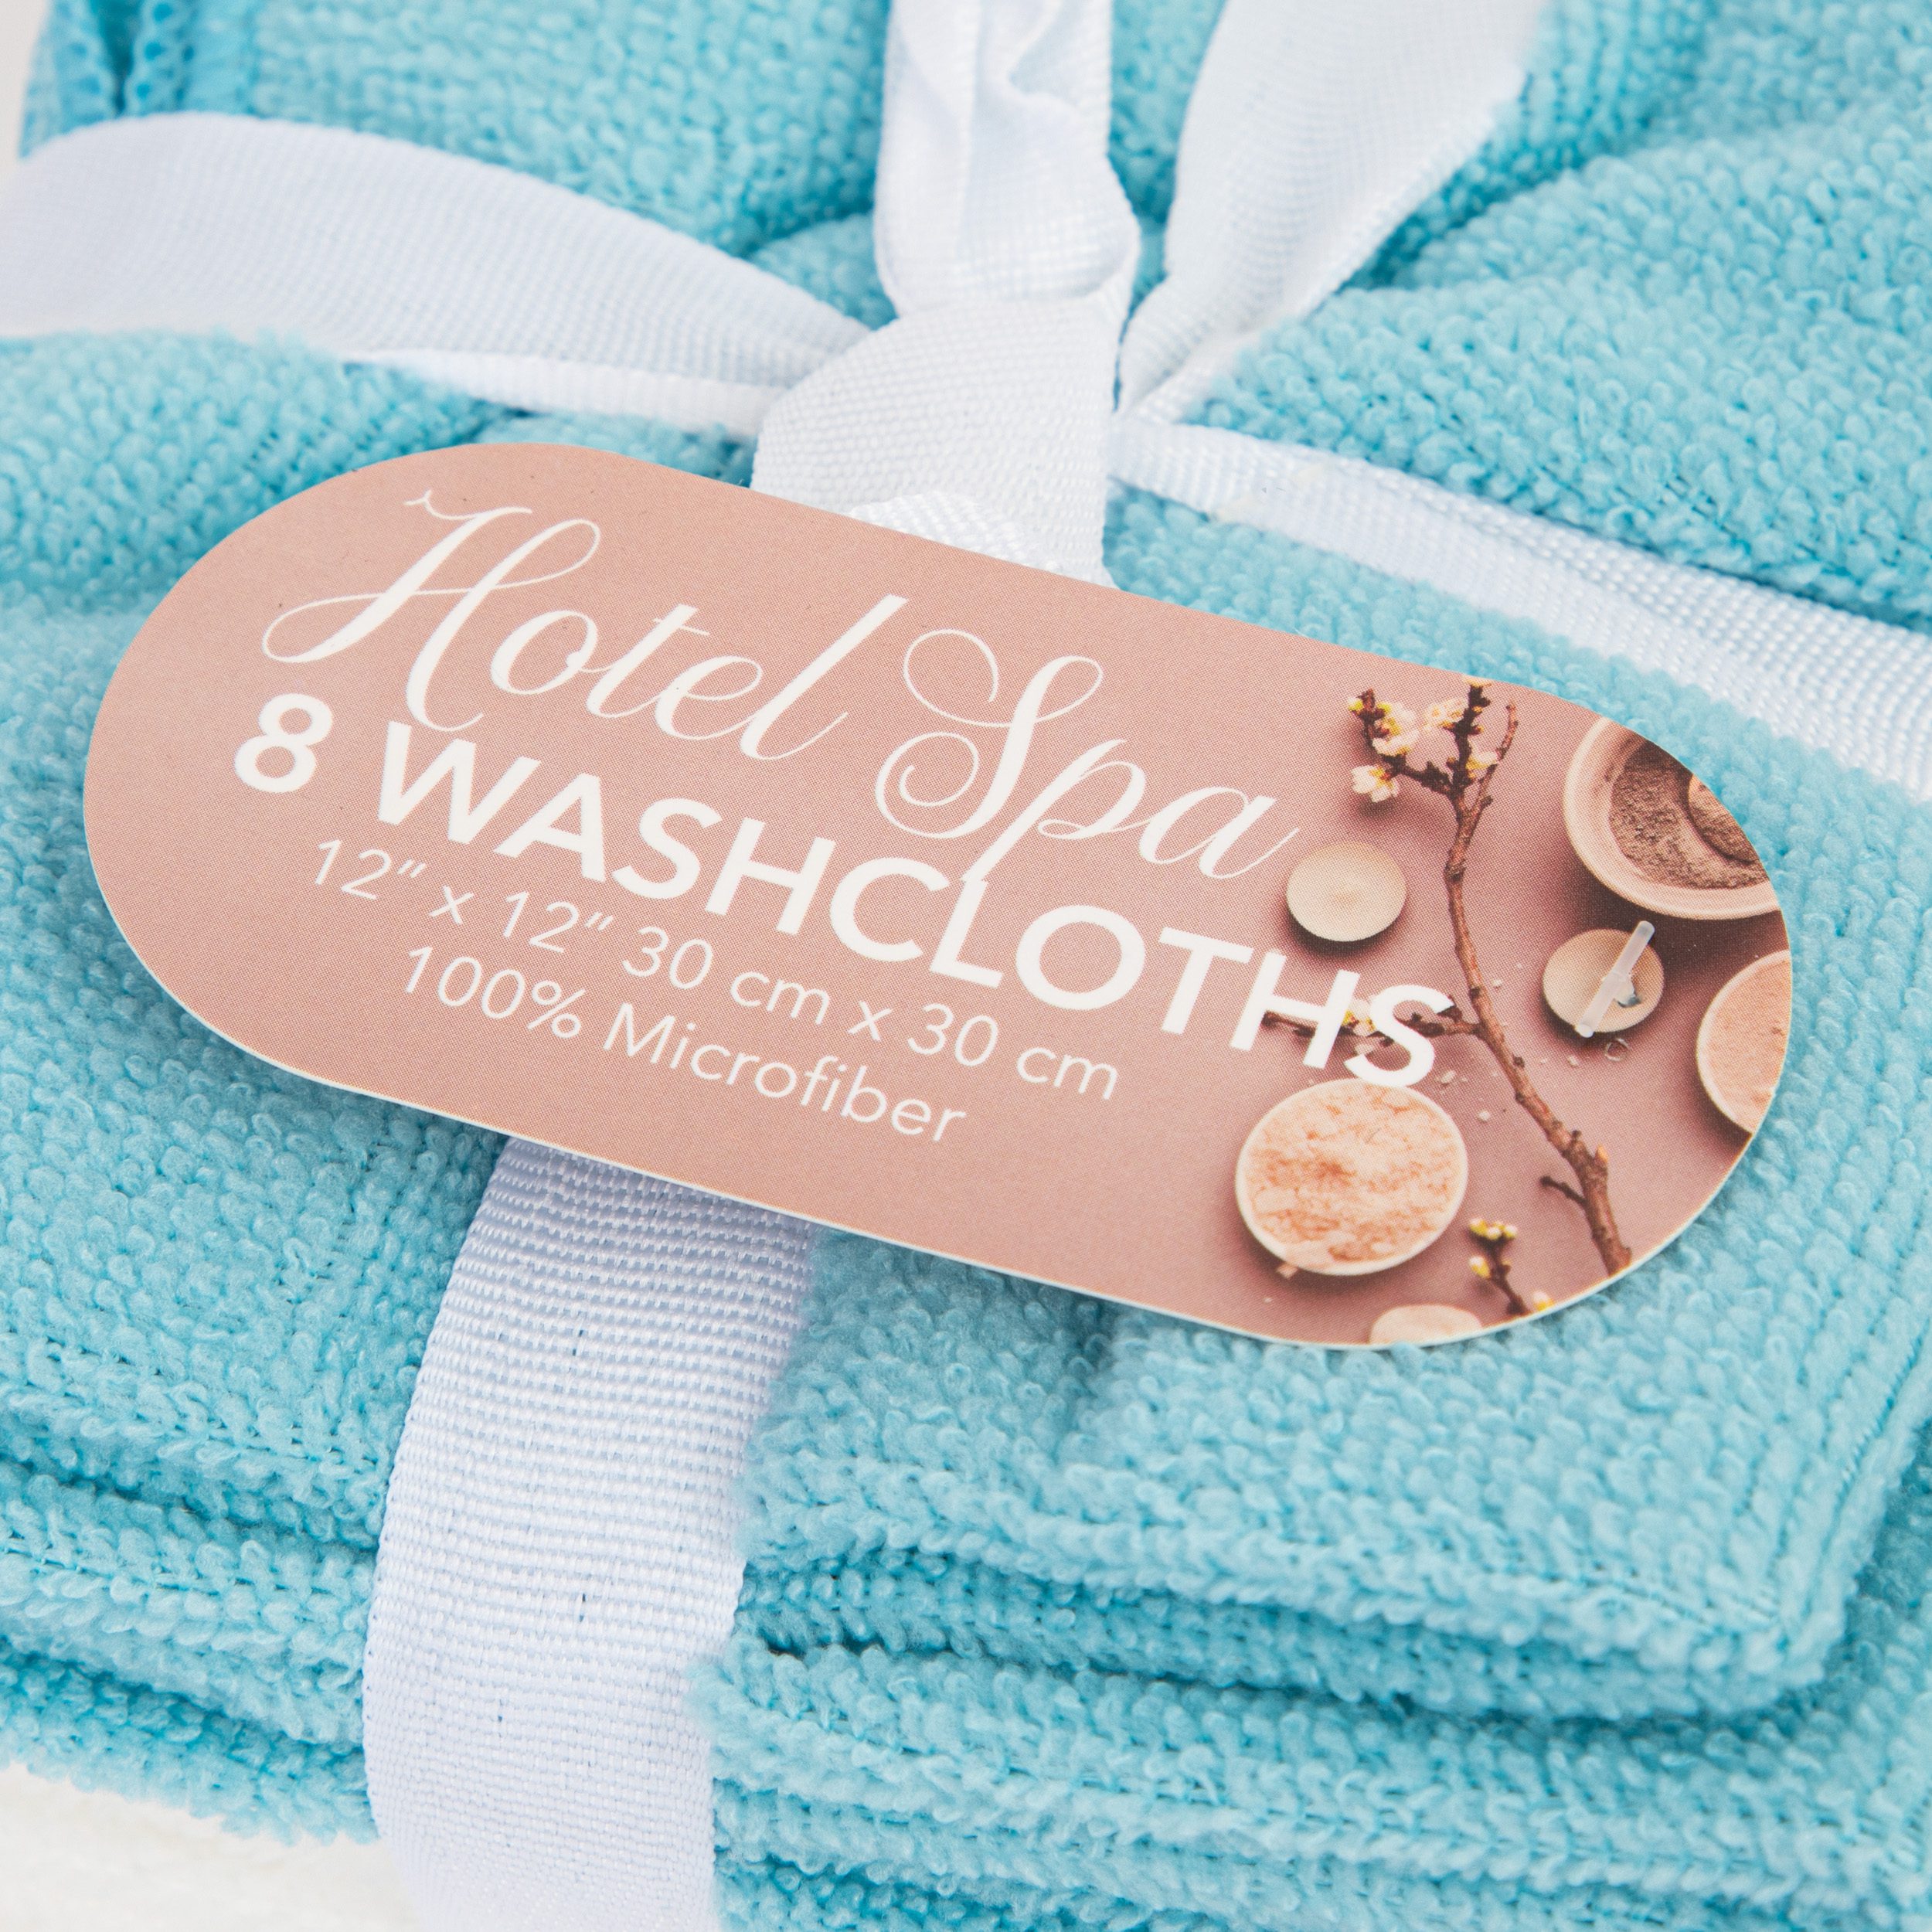 6 Pack Deluxe Baby Washcloths - Wash Cloths - Bathing - Products